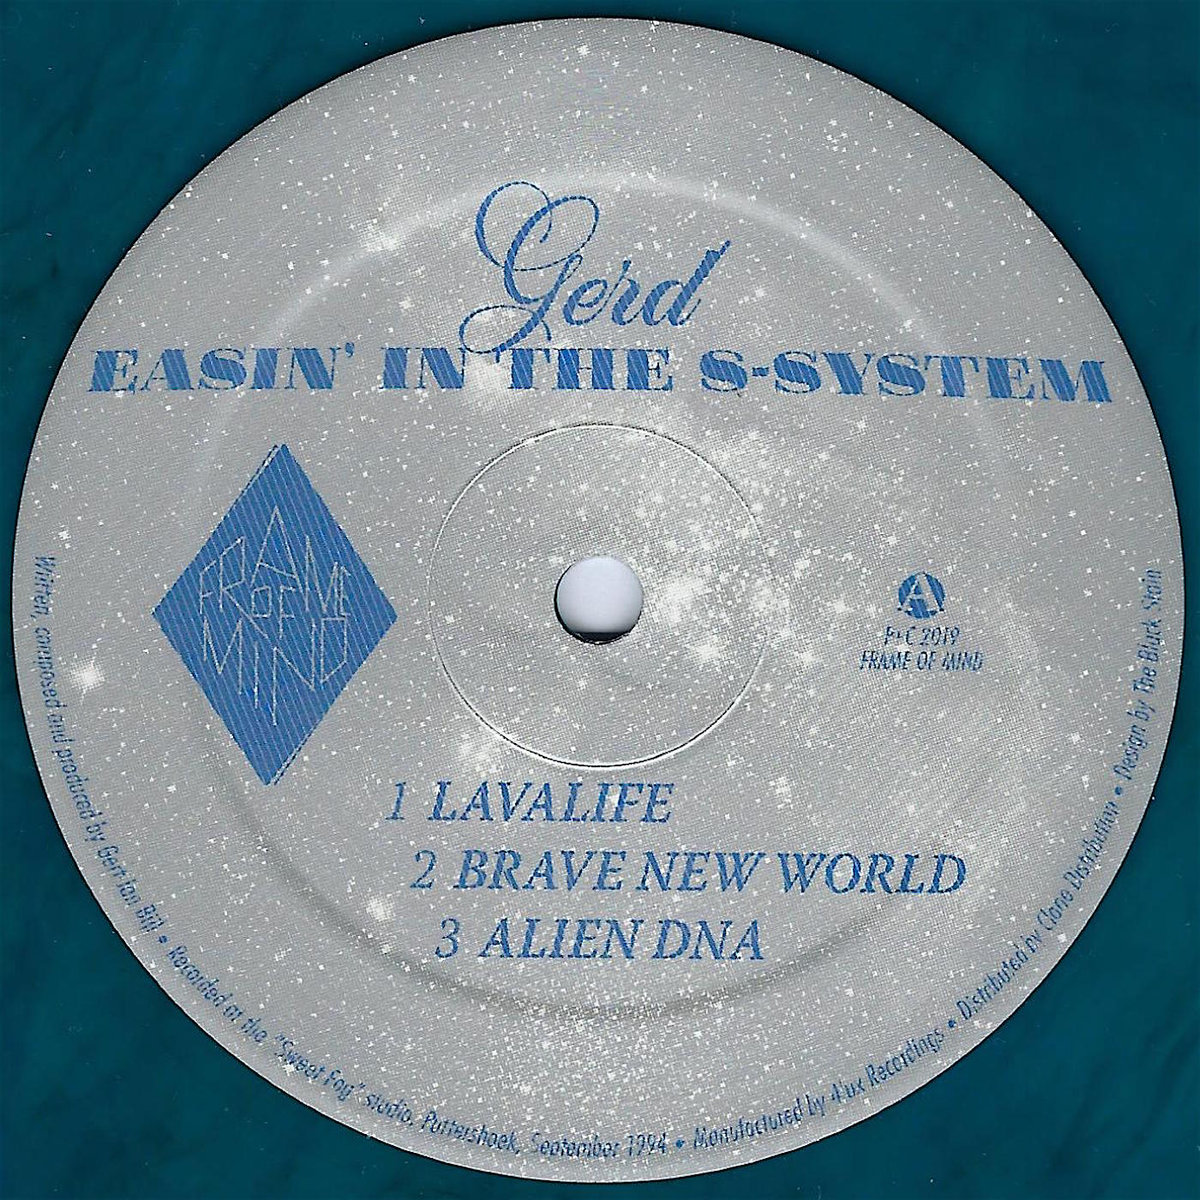 image cover: Gerd - Easin' In The S-System / Brave New World Records